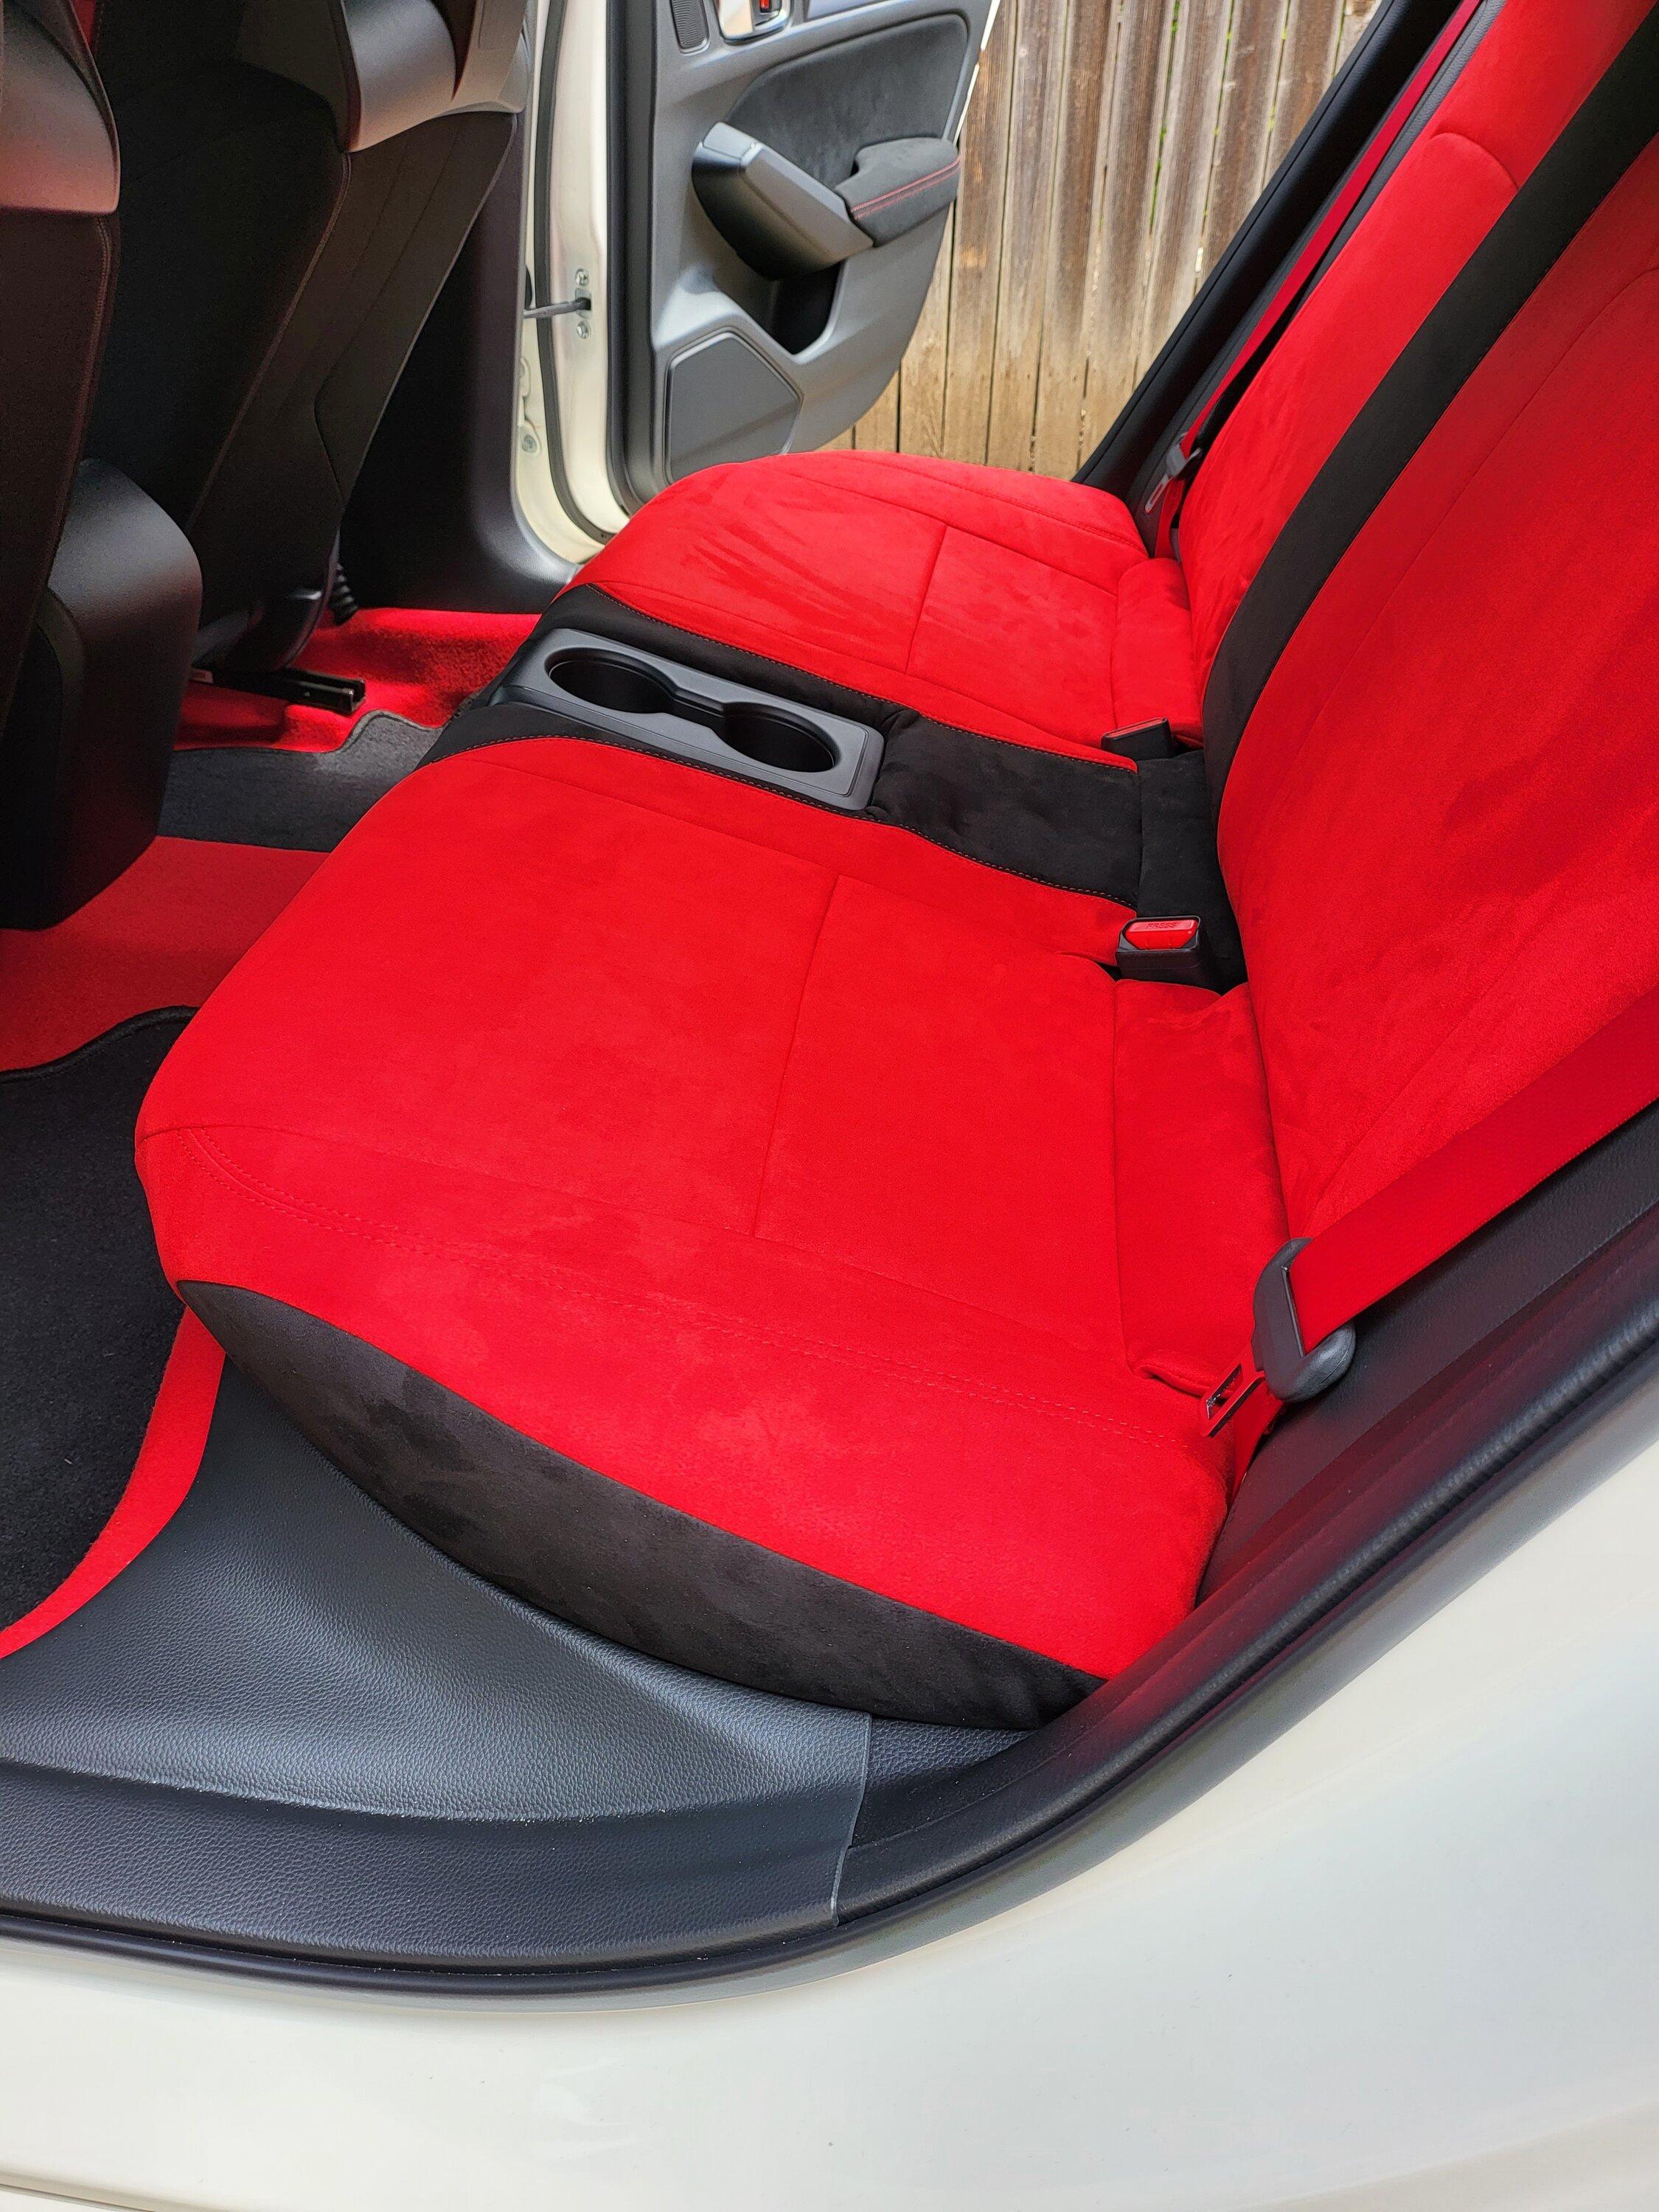 What's everyone's favorite car seat cover? Looking for front seats